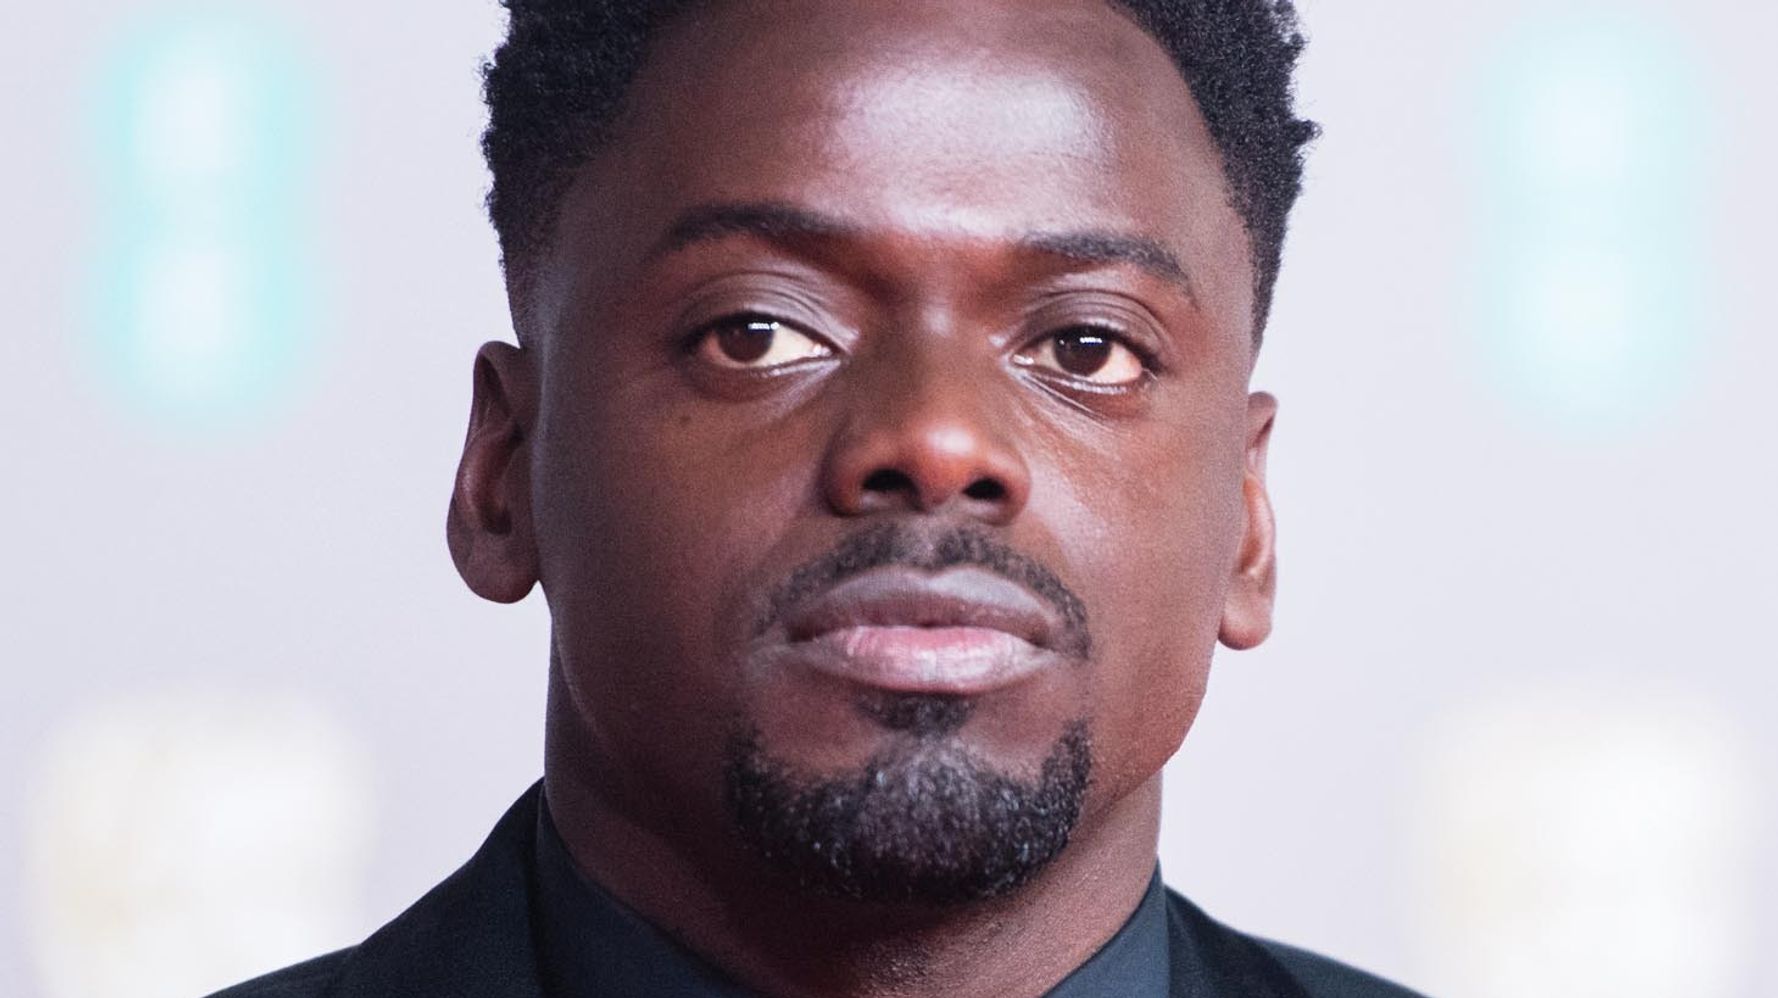 Daniel Kaluuya says he was not invited to the premiere of ‘Get Out’